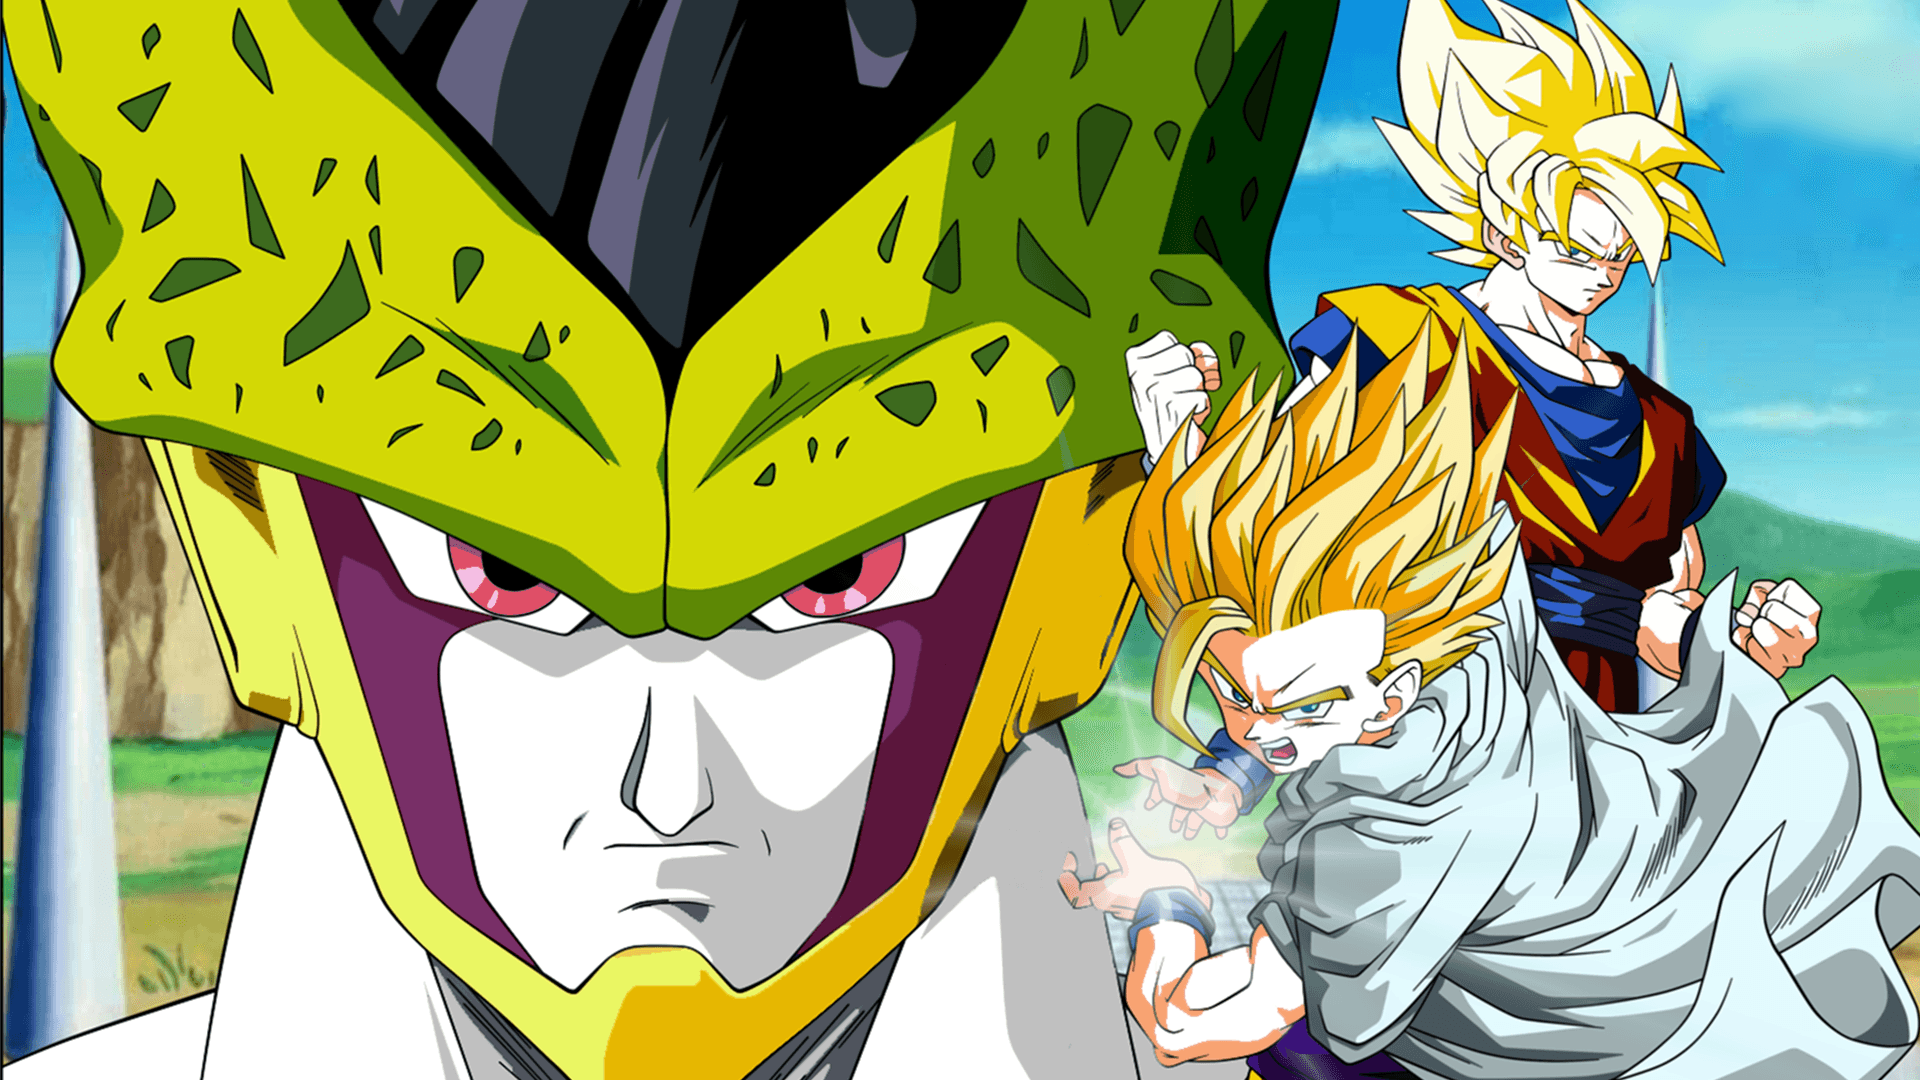 Intense Showdown In The Cell Games: Goku Vs Cell Wallpaper